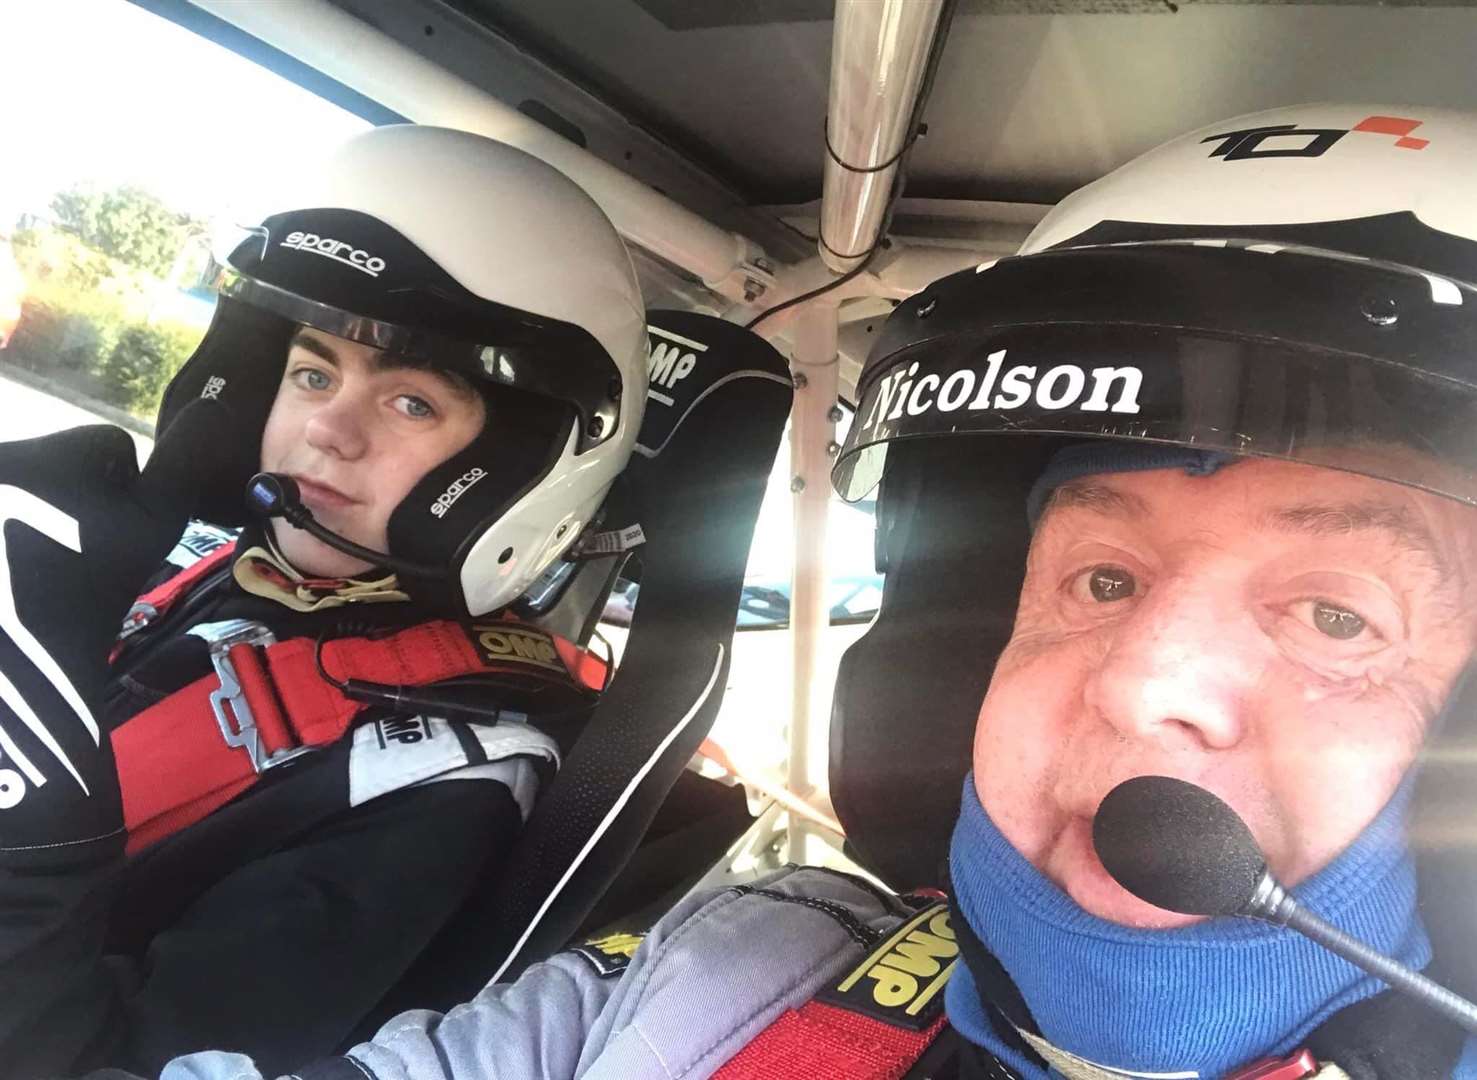 Jack Ryan with navigator Robin Nicolson at the DCC Junior Stages.